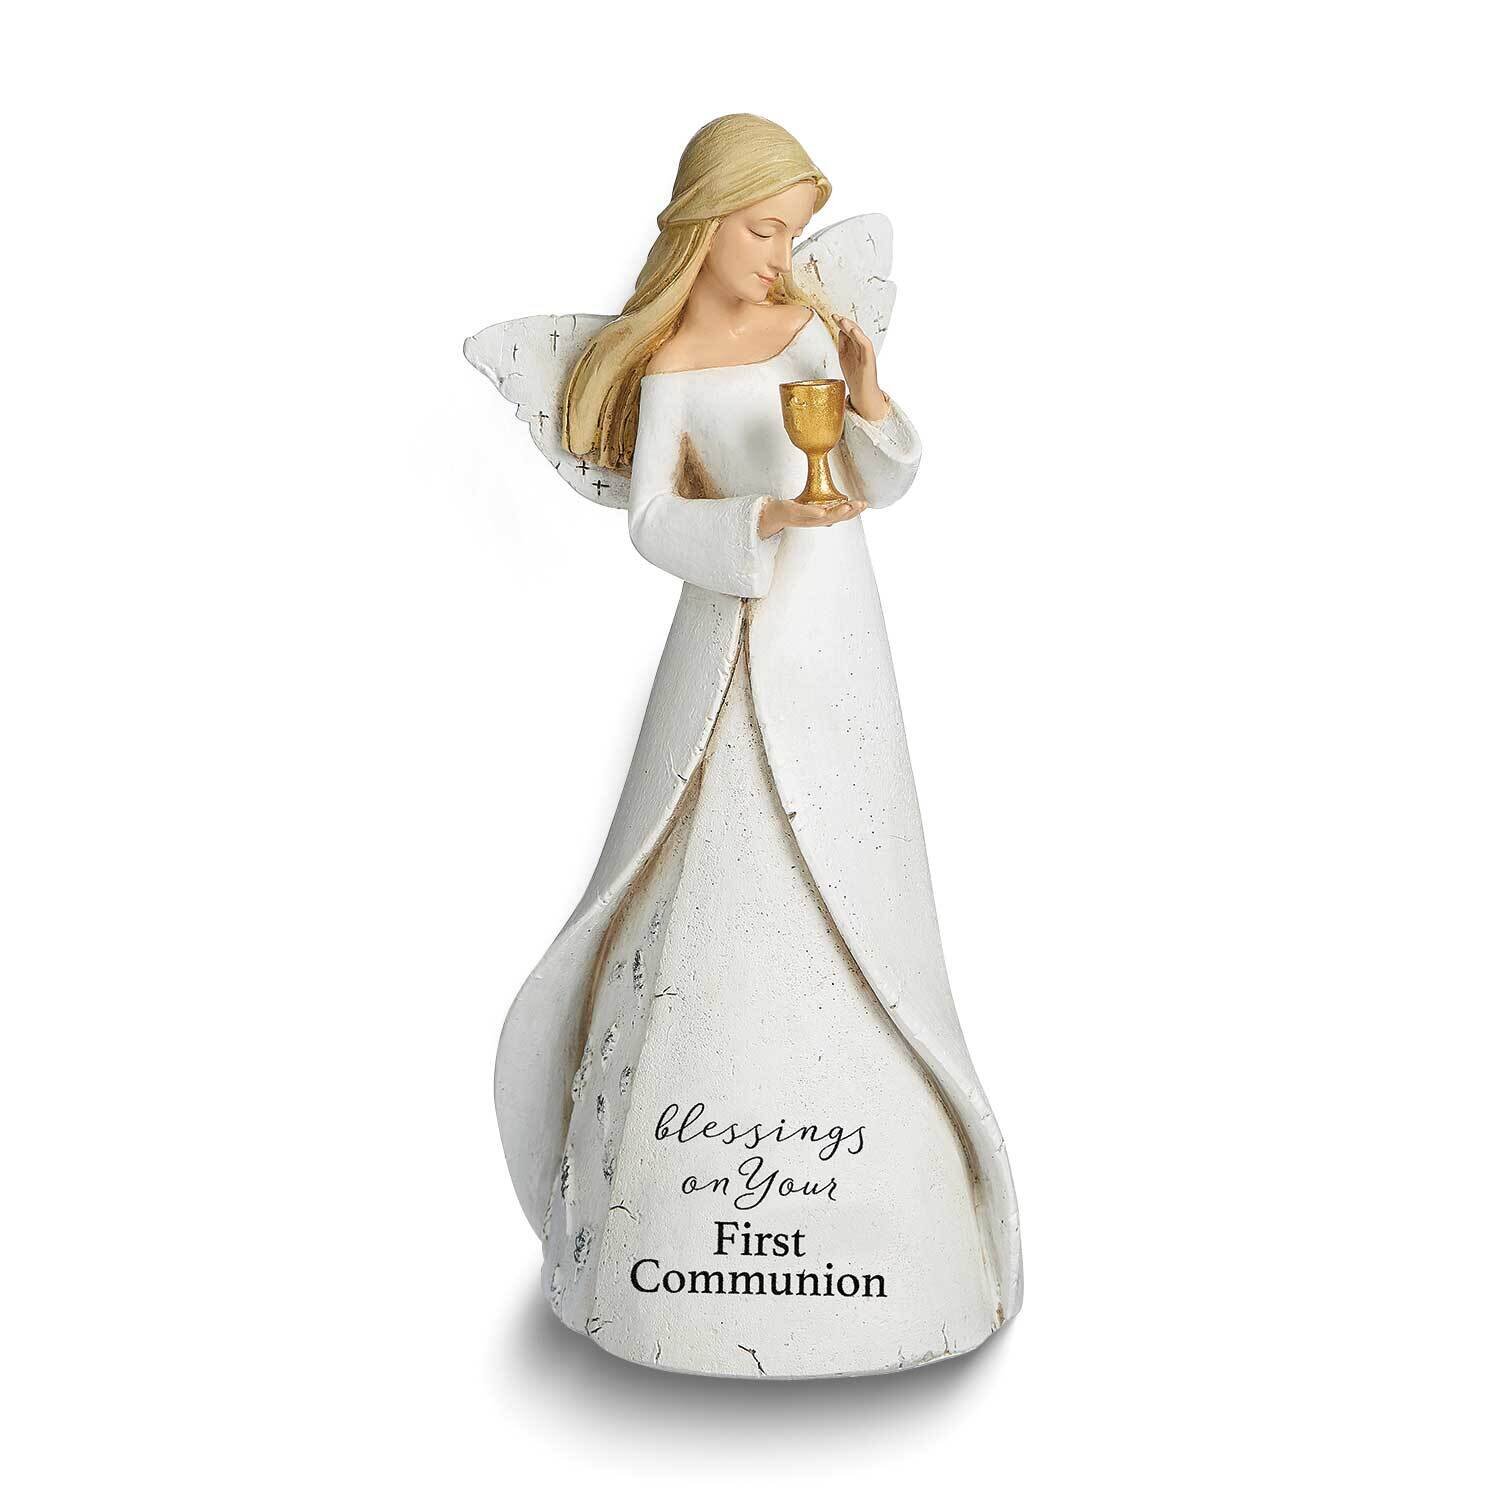 Heavenly Blessings First Communion Angel GM25612